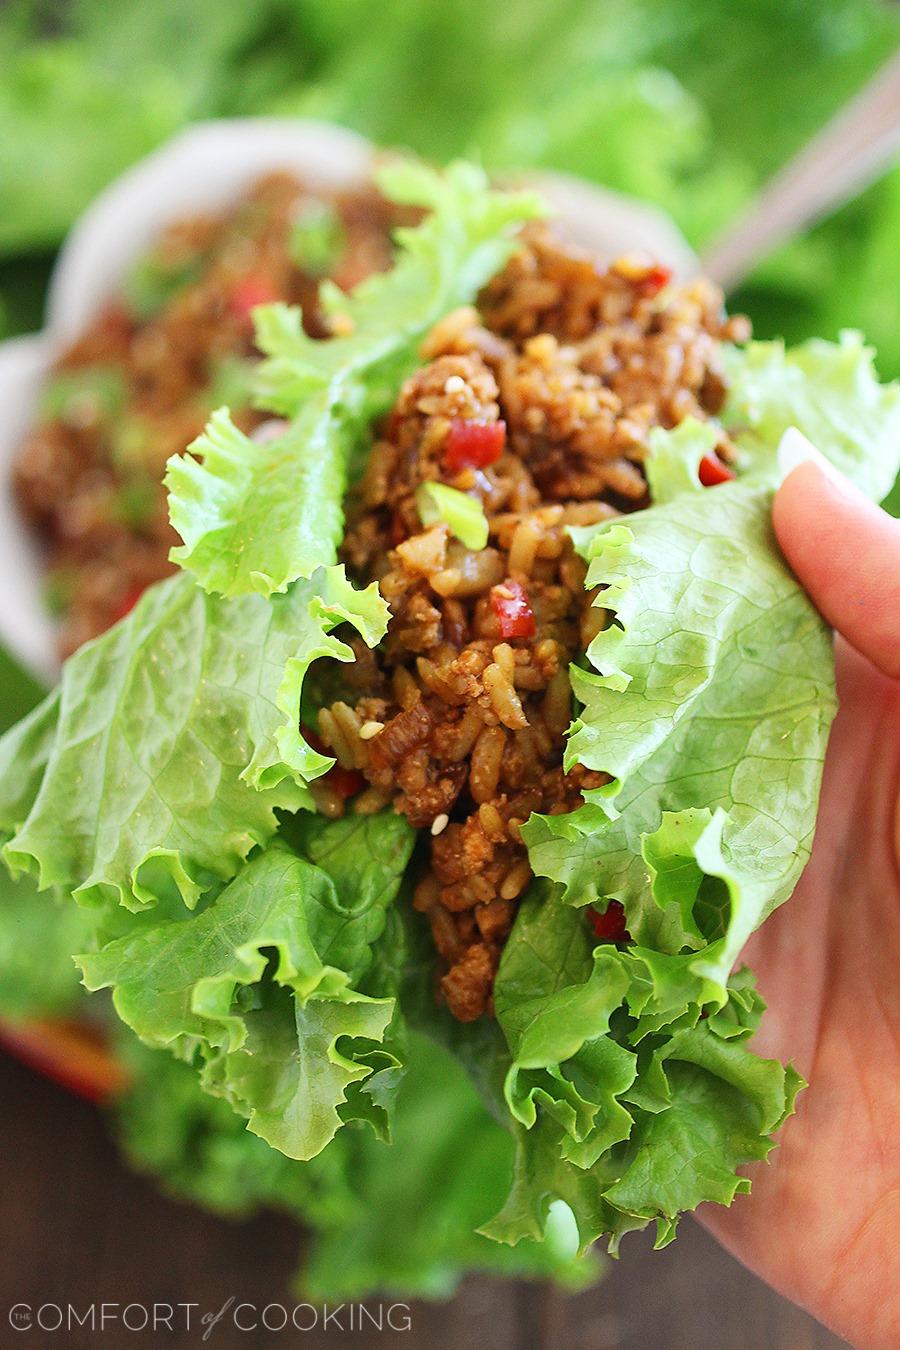 Slow Cooker Asian Chicken Lettuce Wraps – Simmer these delicious, low-carb Asian chicken lettuce wraps in your slow cooker for a fresh & healthy home-cooked meal! | thecomfortofcooking.com